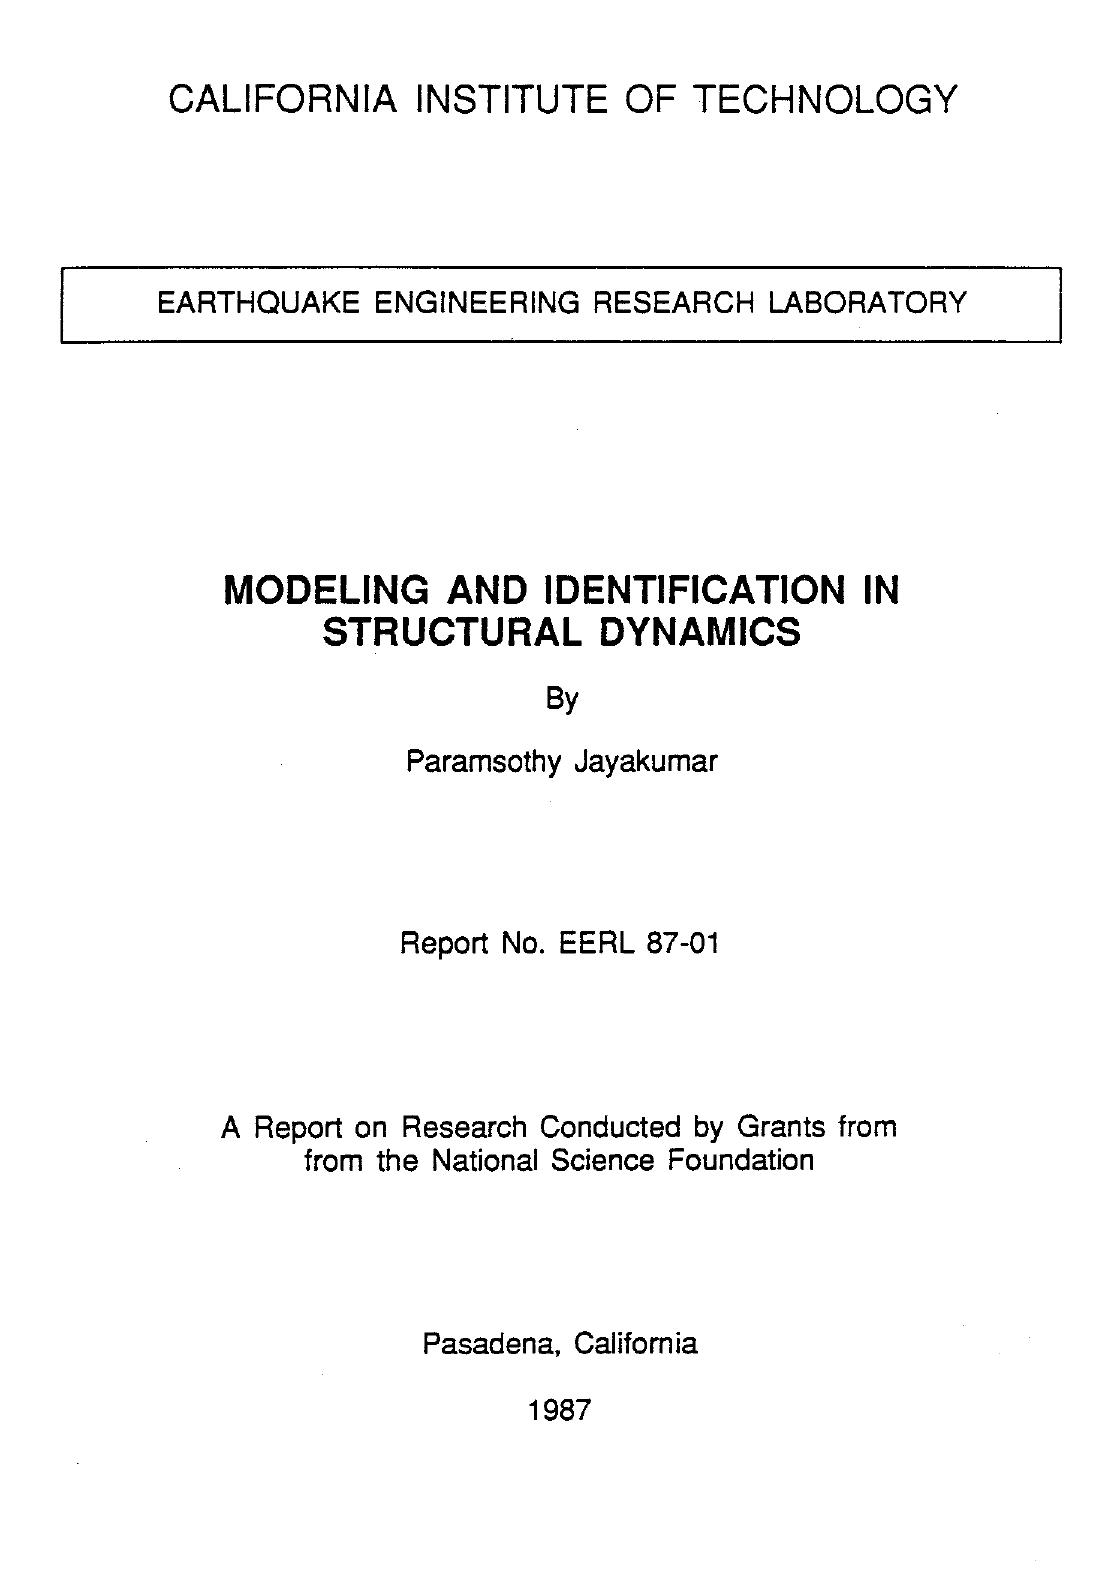 8701-Modeling and identification in structural dynamics